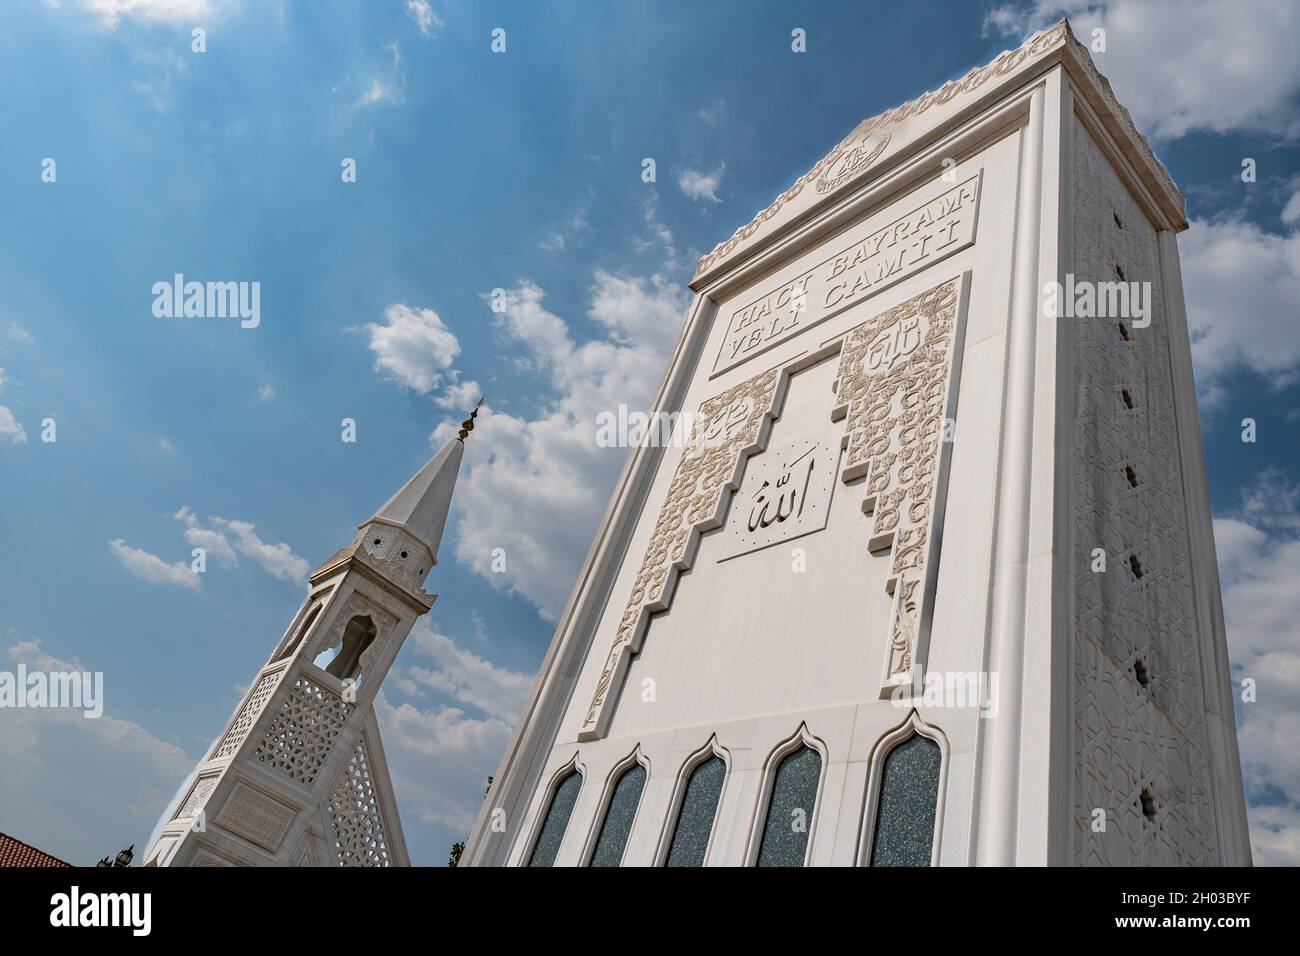 Ankara Haci Bayram Turbesi Mausoleum Breathtaking Picturesque View of Mihrab on a Blue Sky Day in Summer Stock Photo